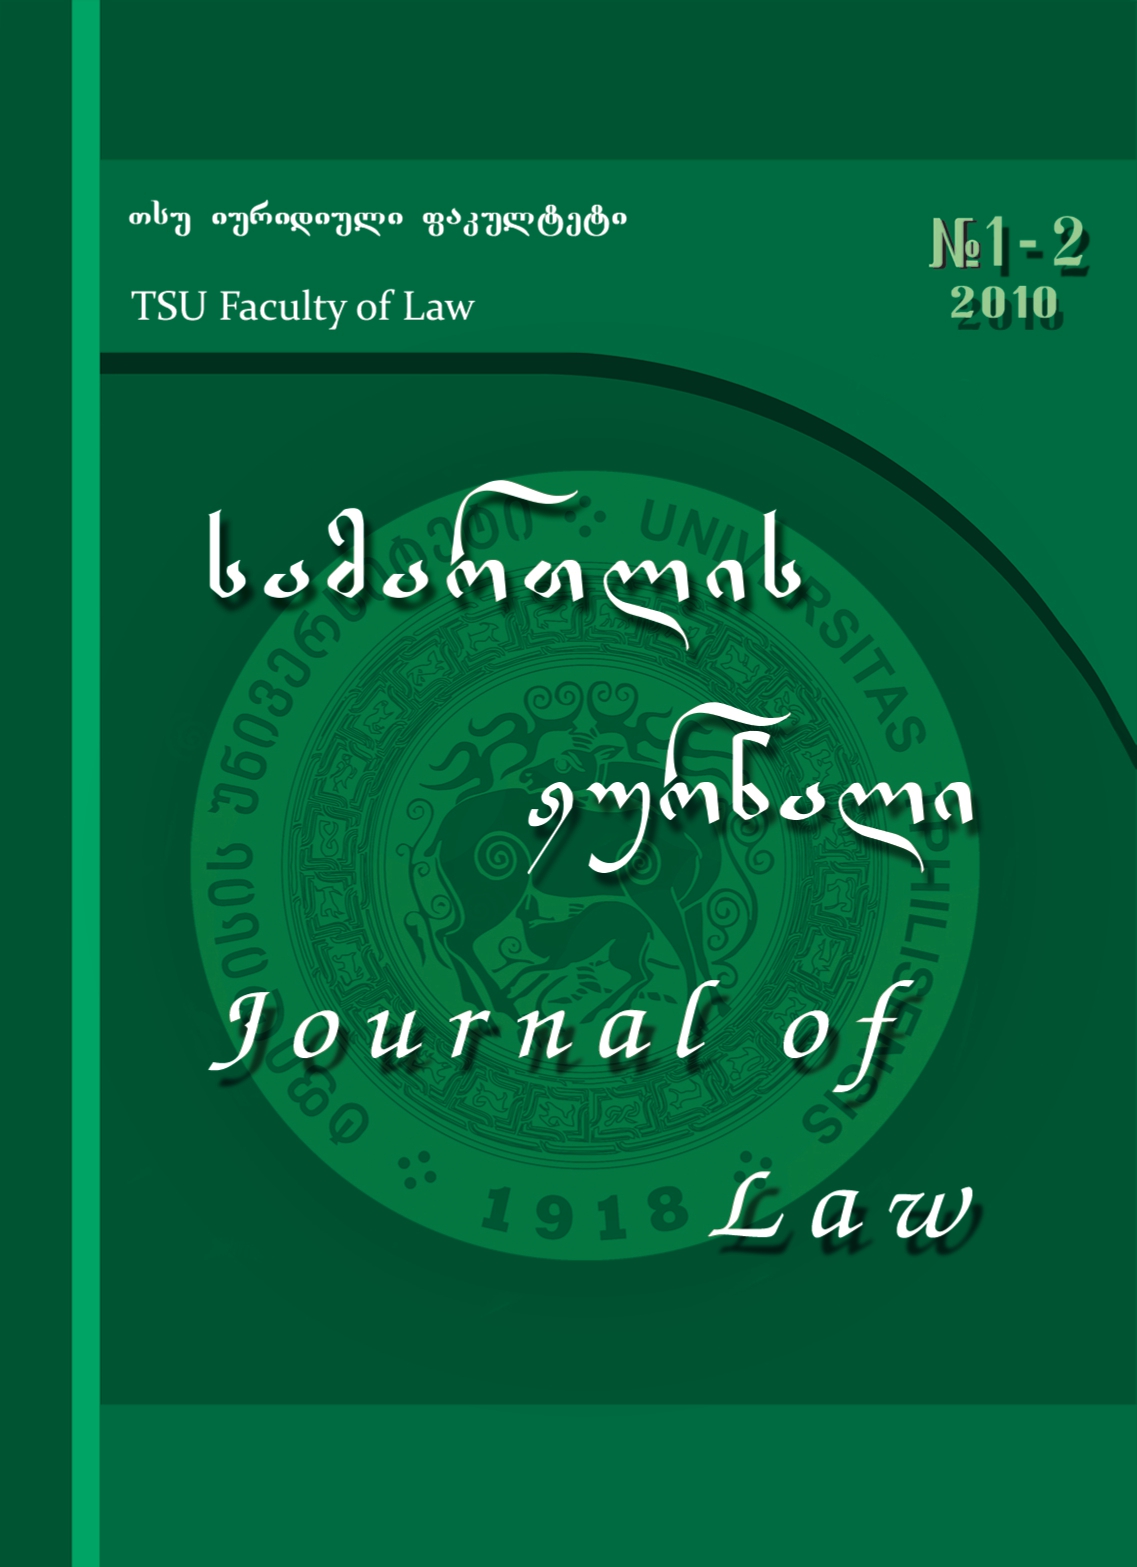 					View No. 1-2 (2010): Journal of Law
				